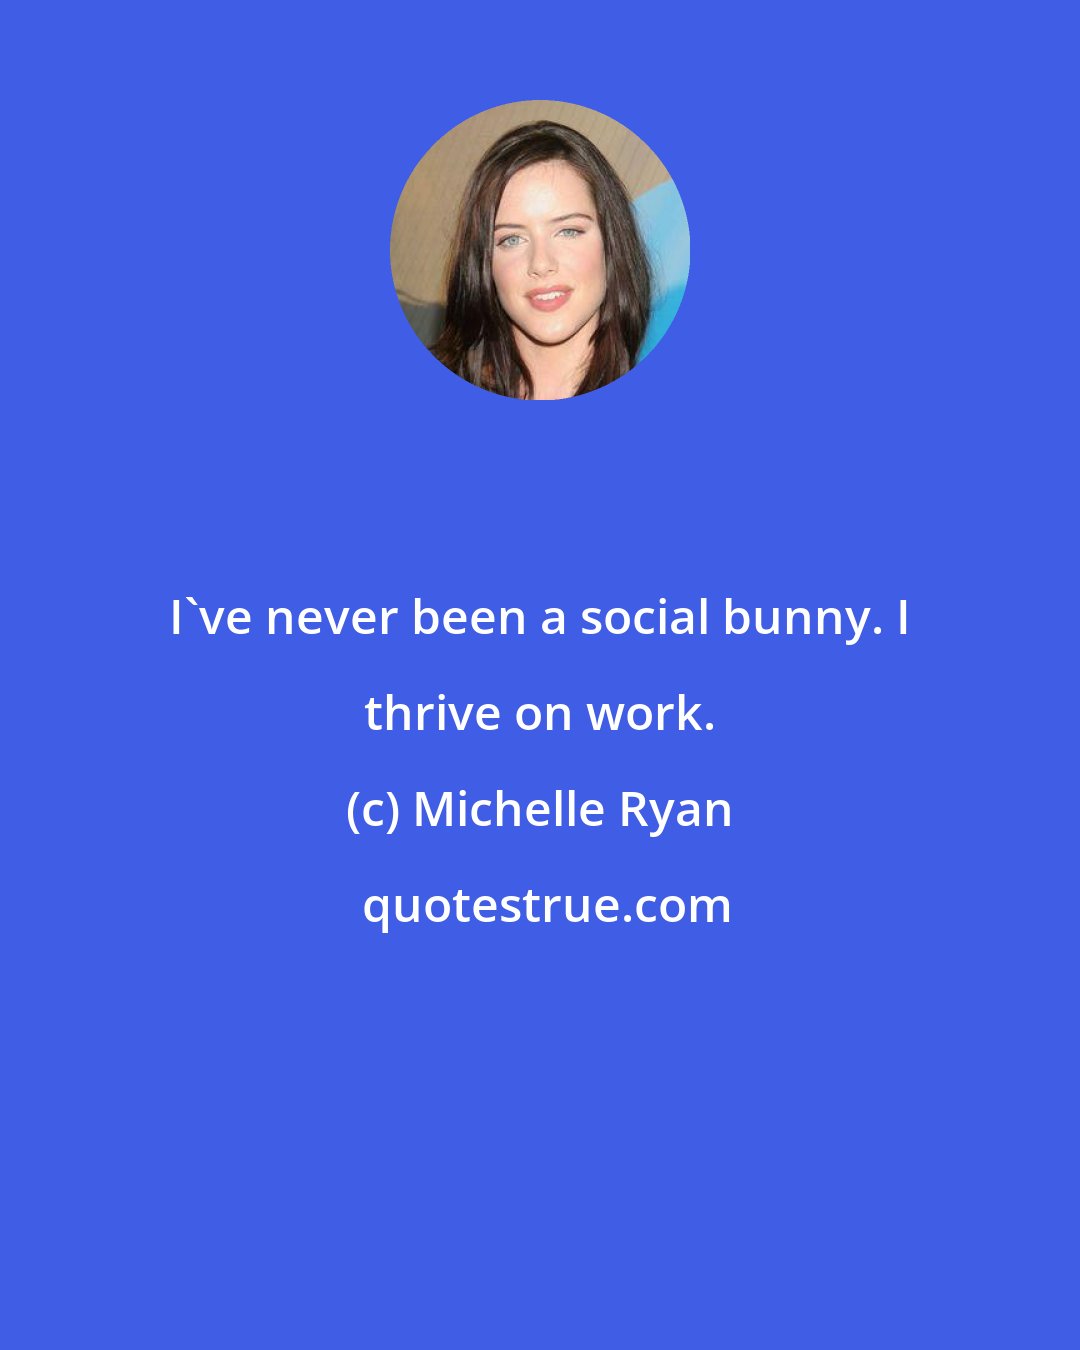 Michelle Ryan: I've never been a social bunny. I thrive on work.